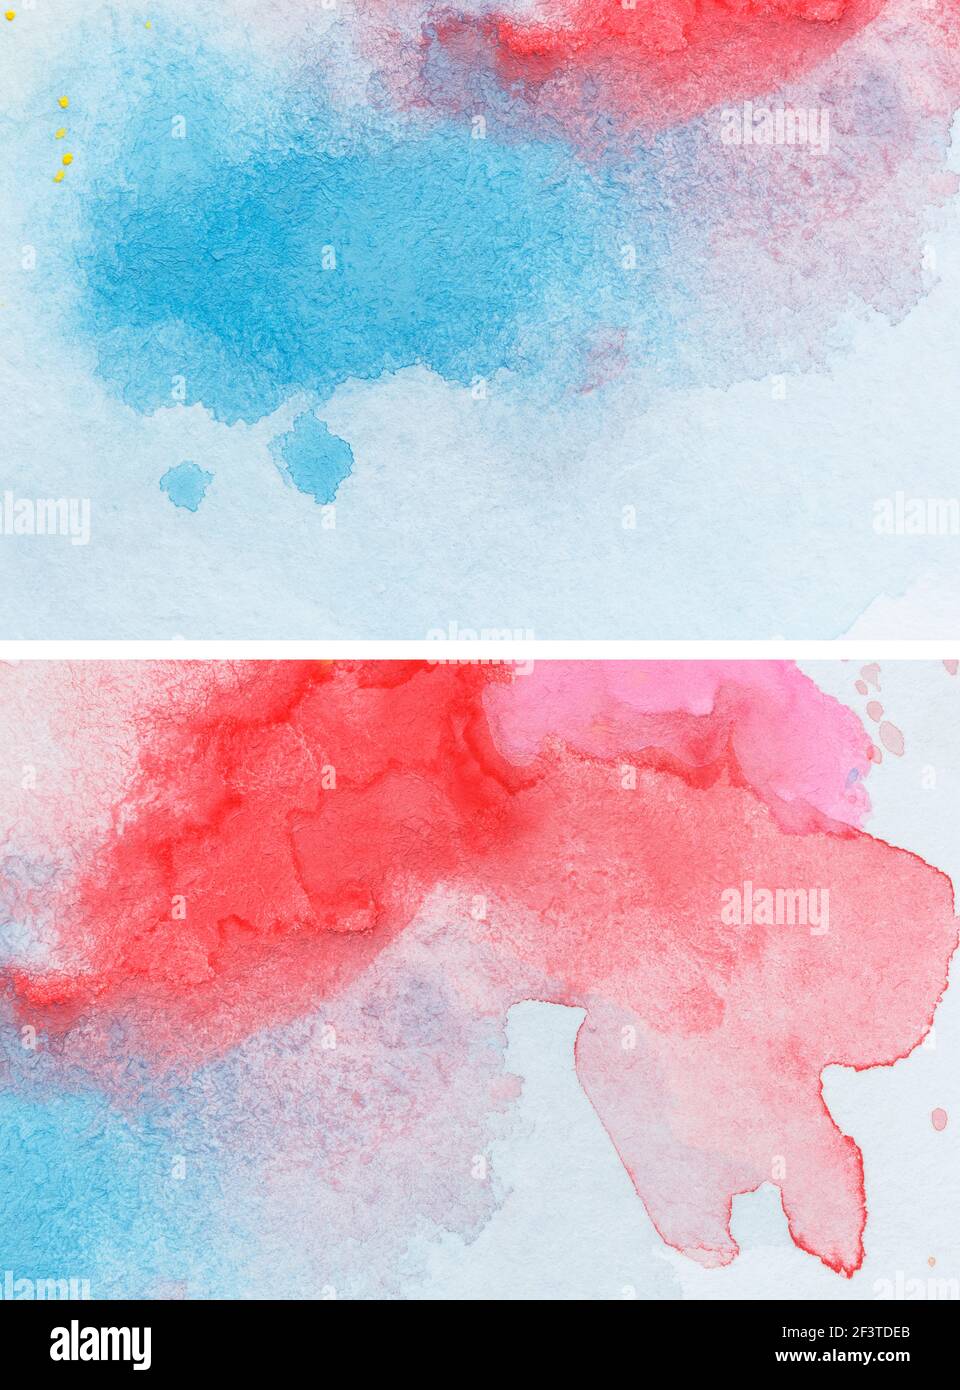 Close-up of two abstract red and light blue watercolor gradient fill backgrounds with watercolour stains. Two high resolution full frame paper texture Stock Photo